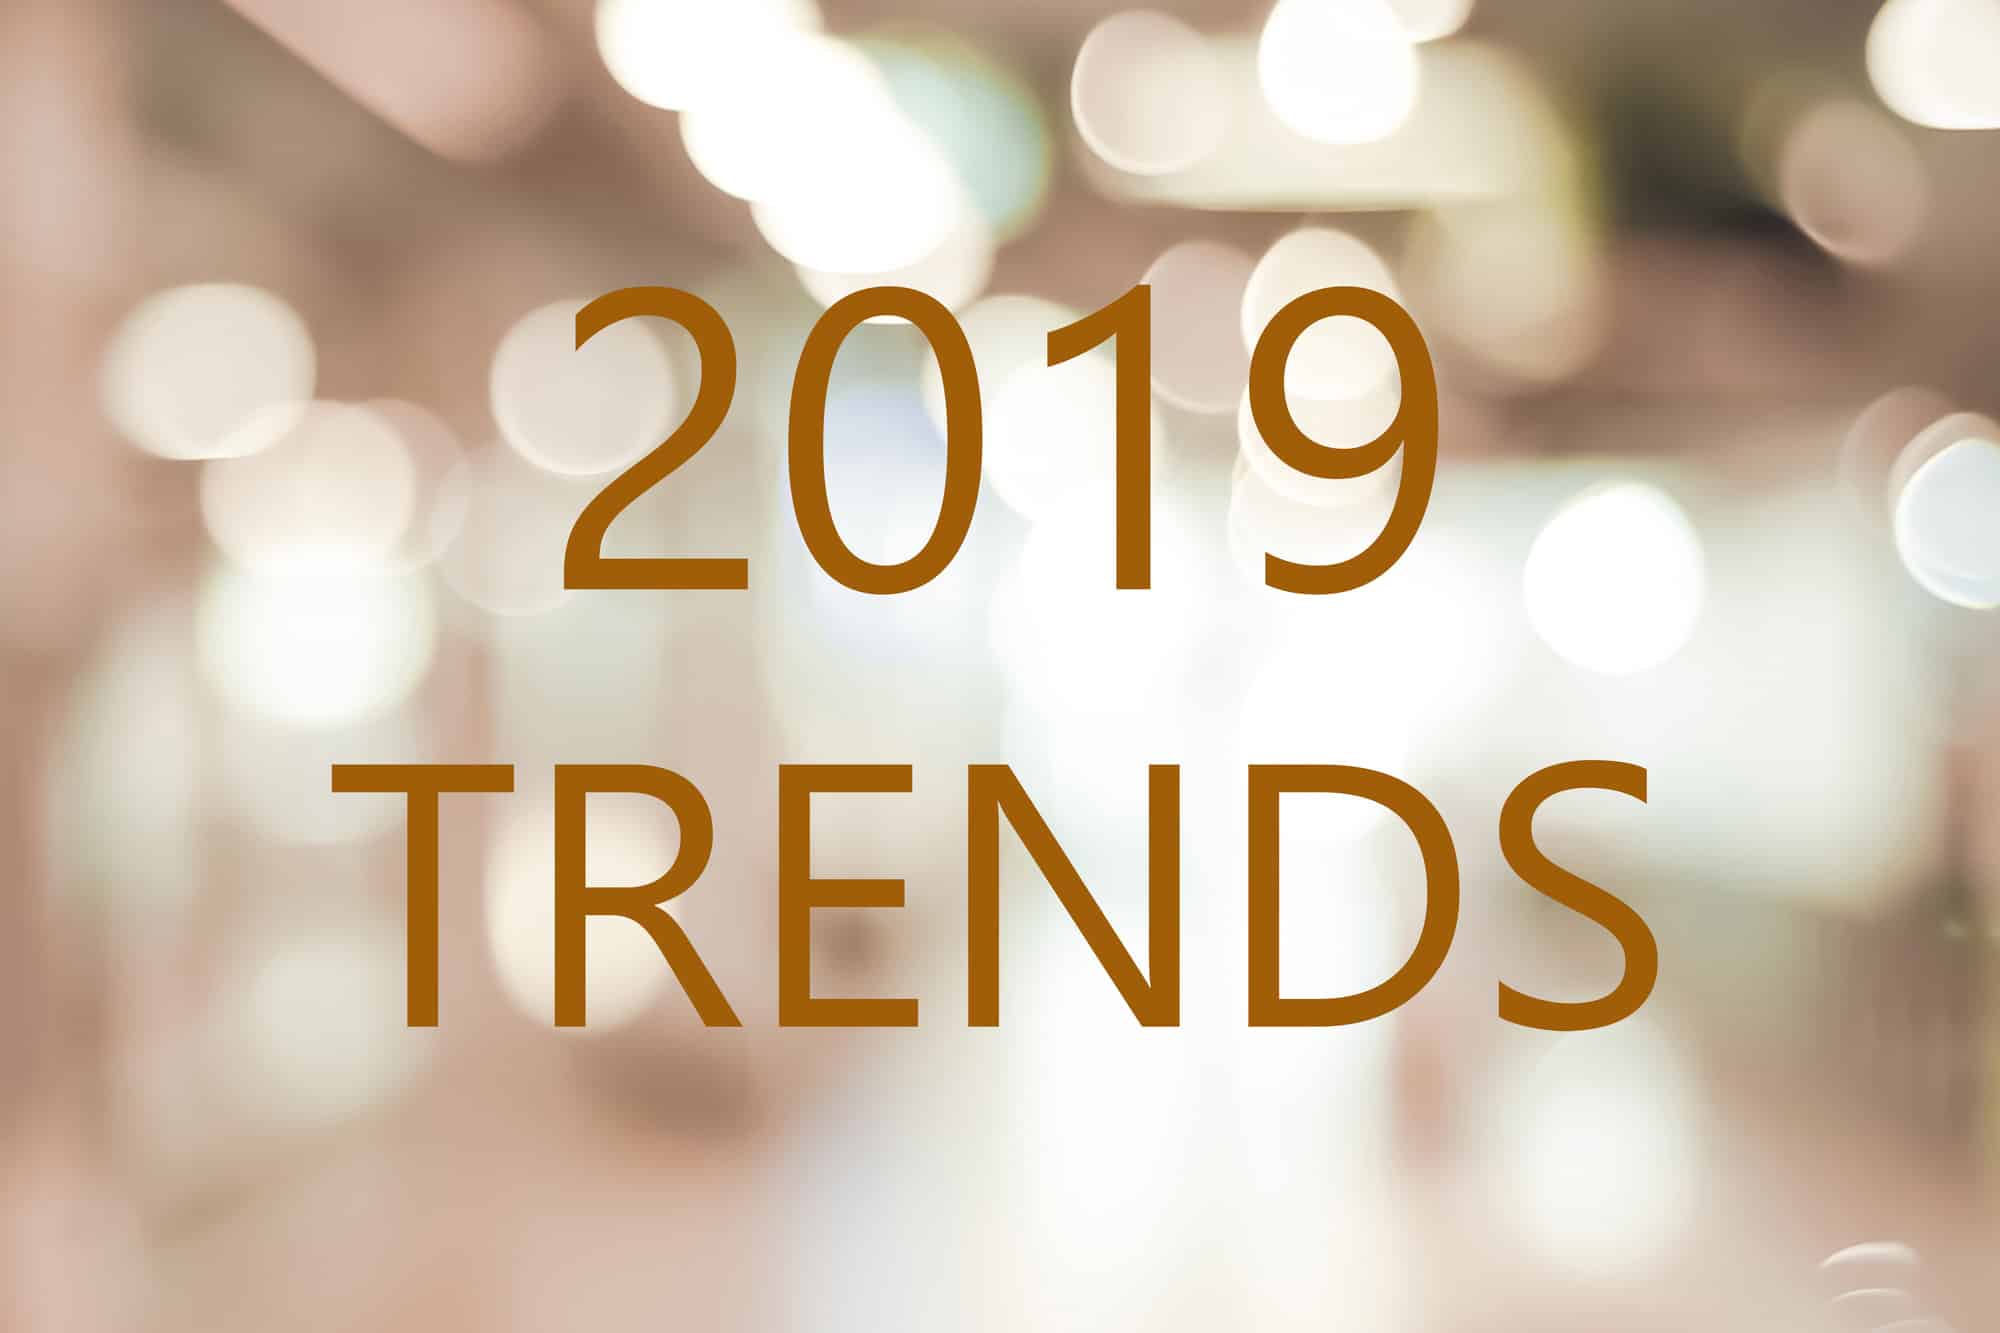 Web Design Trends to Use in 2019